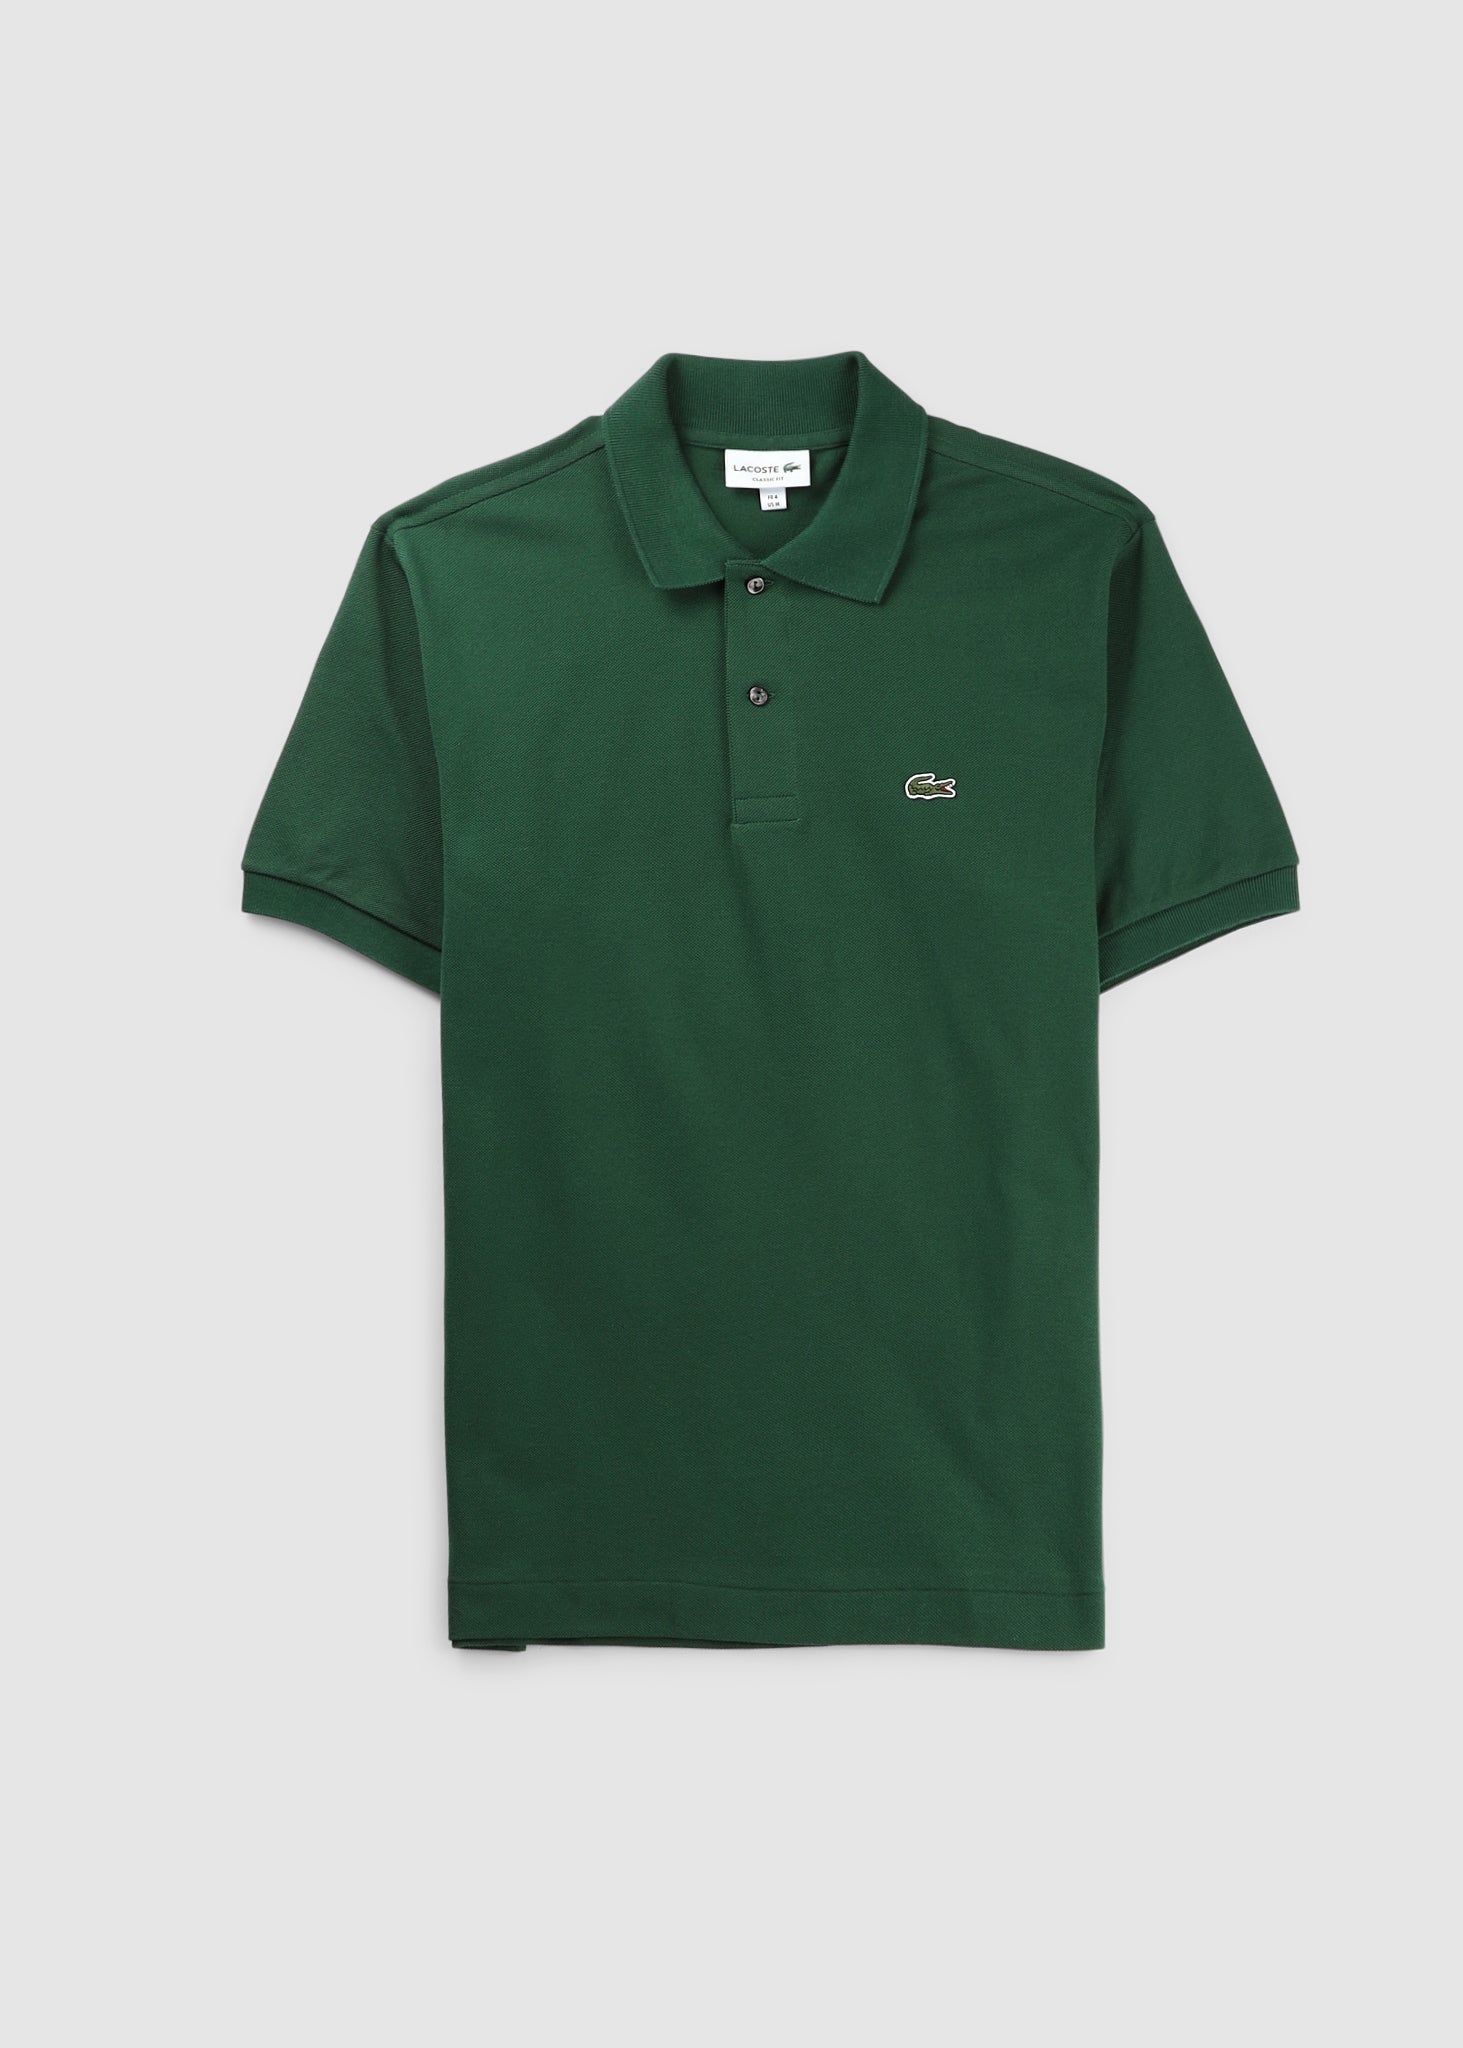 Lacoste Mens Classic Pique Poloshirt In Green - Green